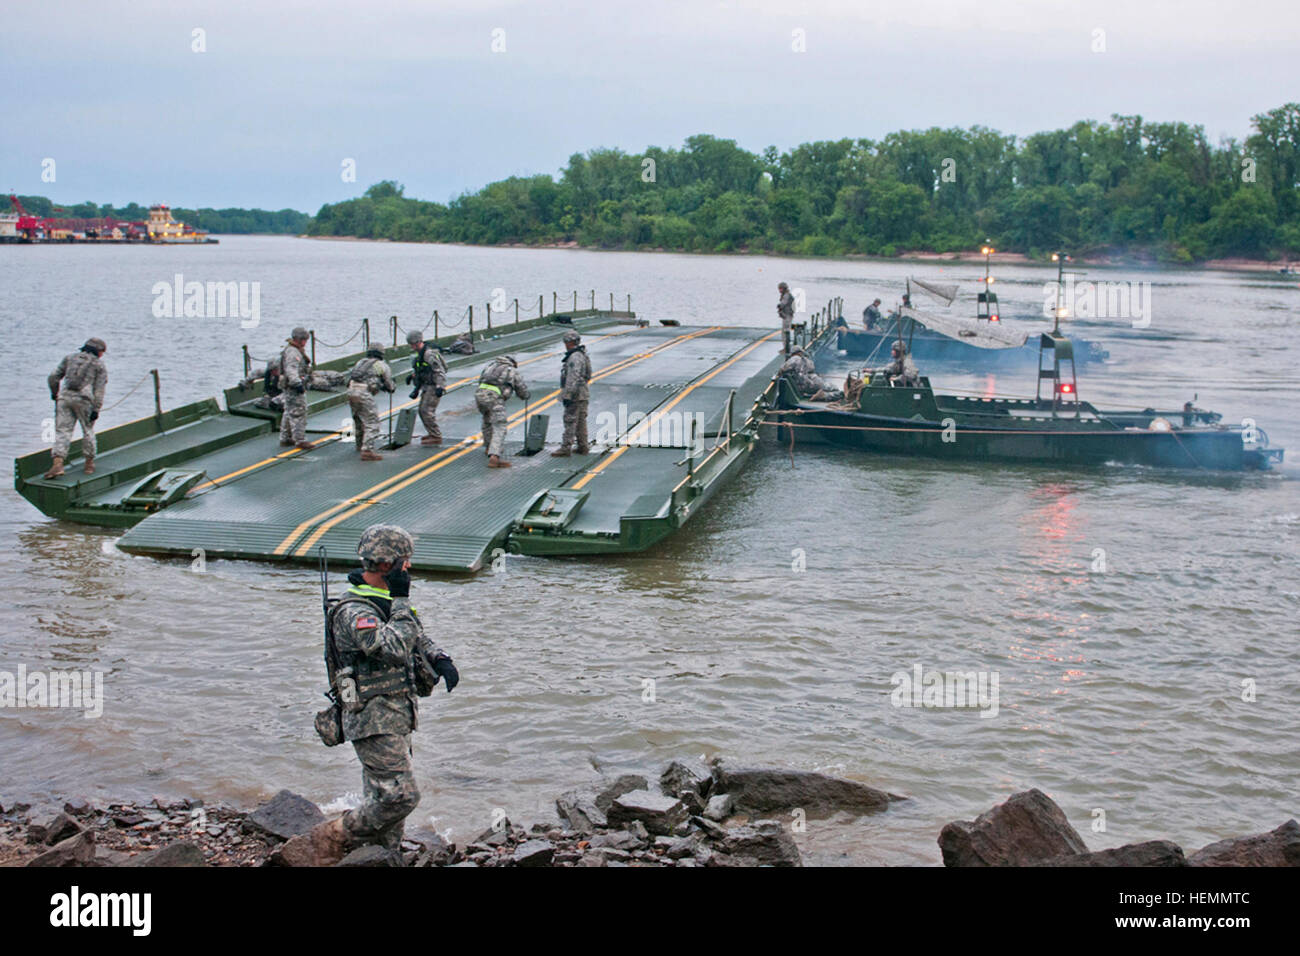 U.S. Army combat engineers with the 671st Engineer Company (Multi-Role Bridge), 74th Engineer Company (MRB) and 459th Engineer Company (MRB), merge bridge sections together to create a barge to transport vehicles across the Arkansas River during Operation River Assault at Fort Chaffee, Ark., July 24, 2013.  (U.S. Army photo by Sgt. Dalton Smith/Released) Operation River Assault 2013 130724-A-BG398-007 Stock Photo